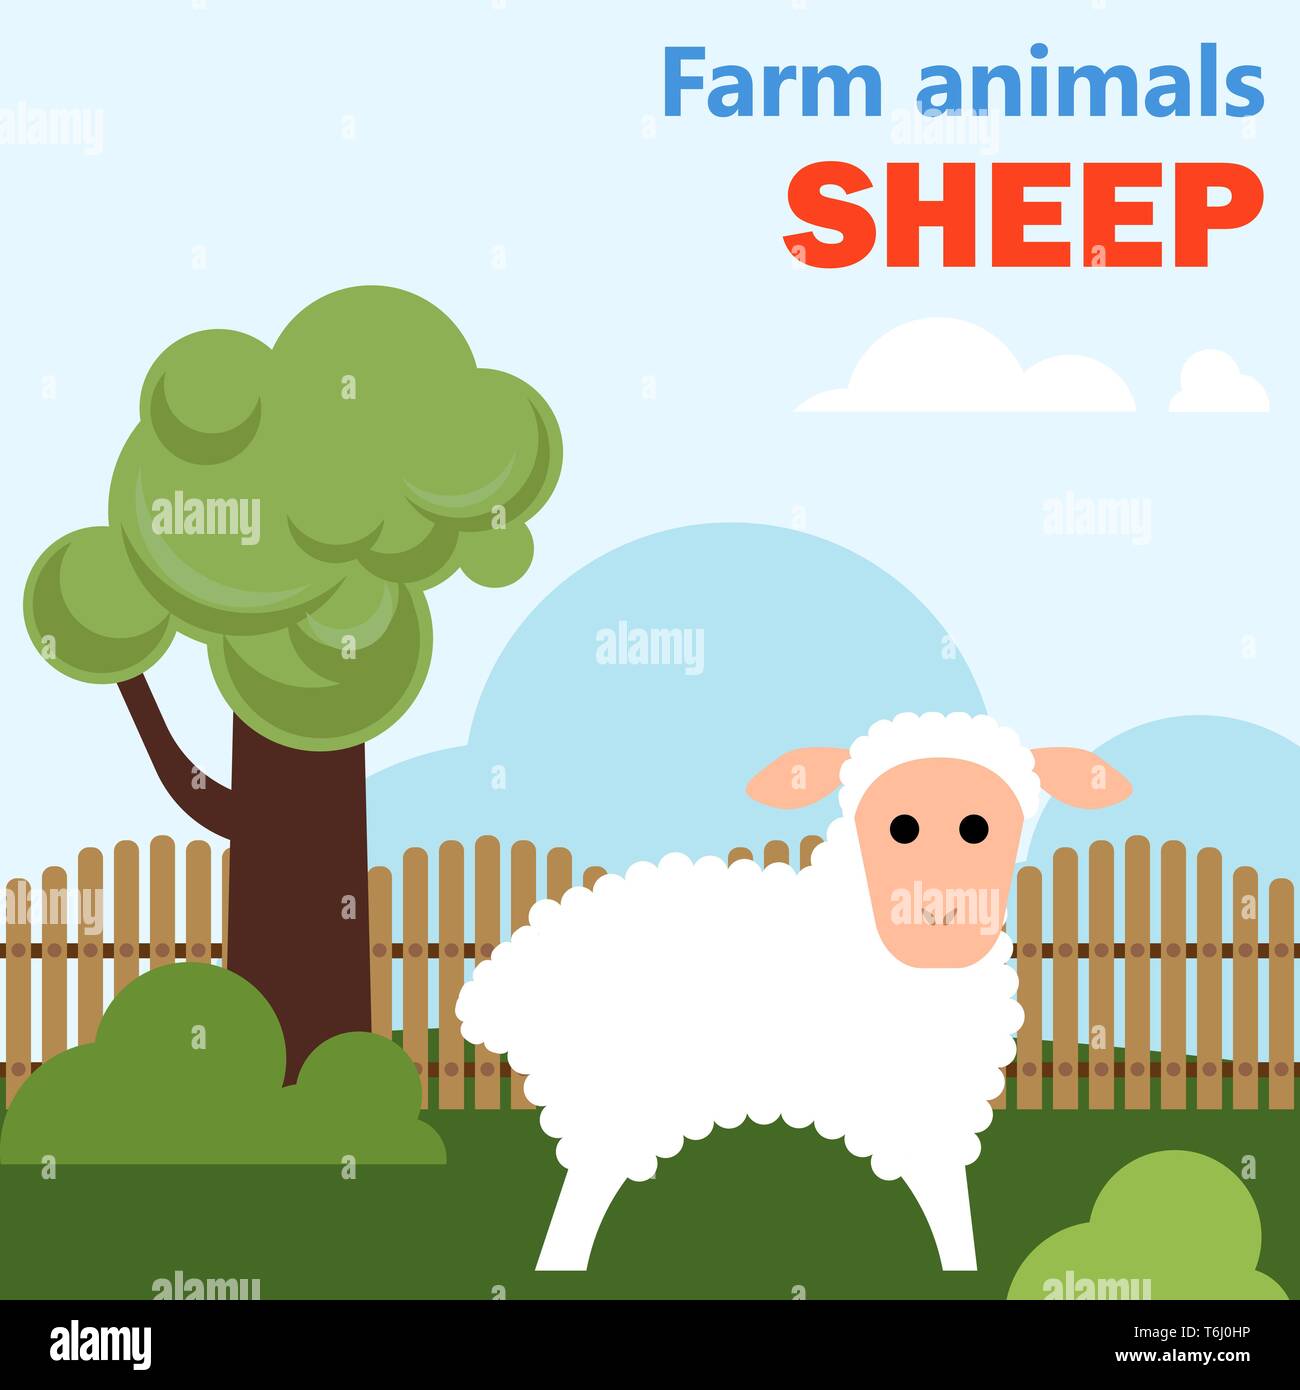 The Farm animal sheep on peaceful meadow with grass and tree. Educational flashcard for teaching preschool in kindergarten. Colorful flat cartoon styl Stock Vector